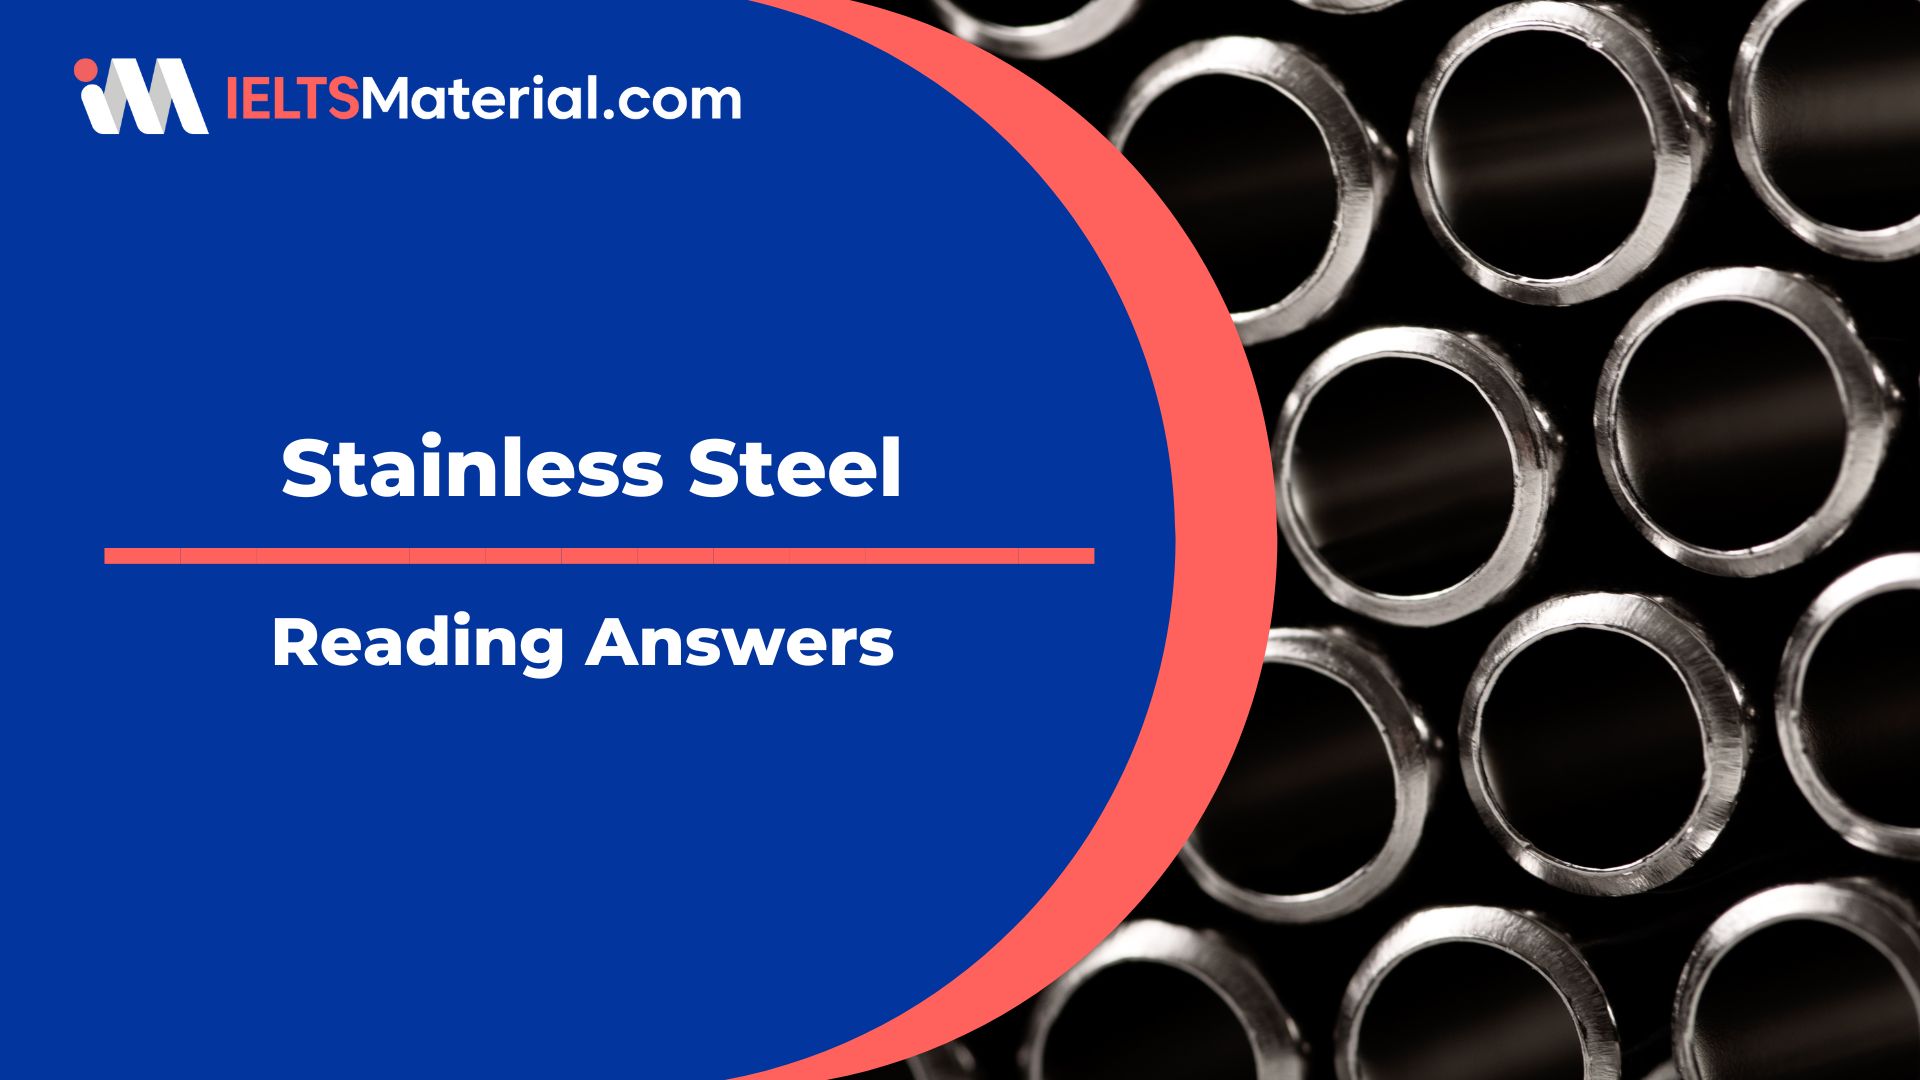 Stainless Steel Reading Answers